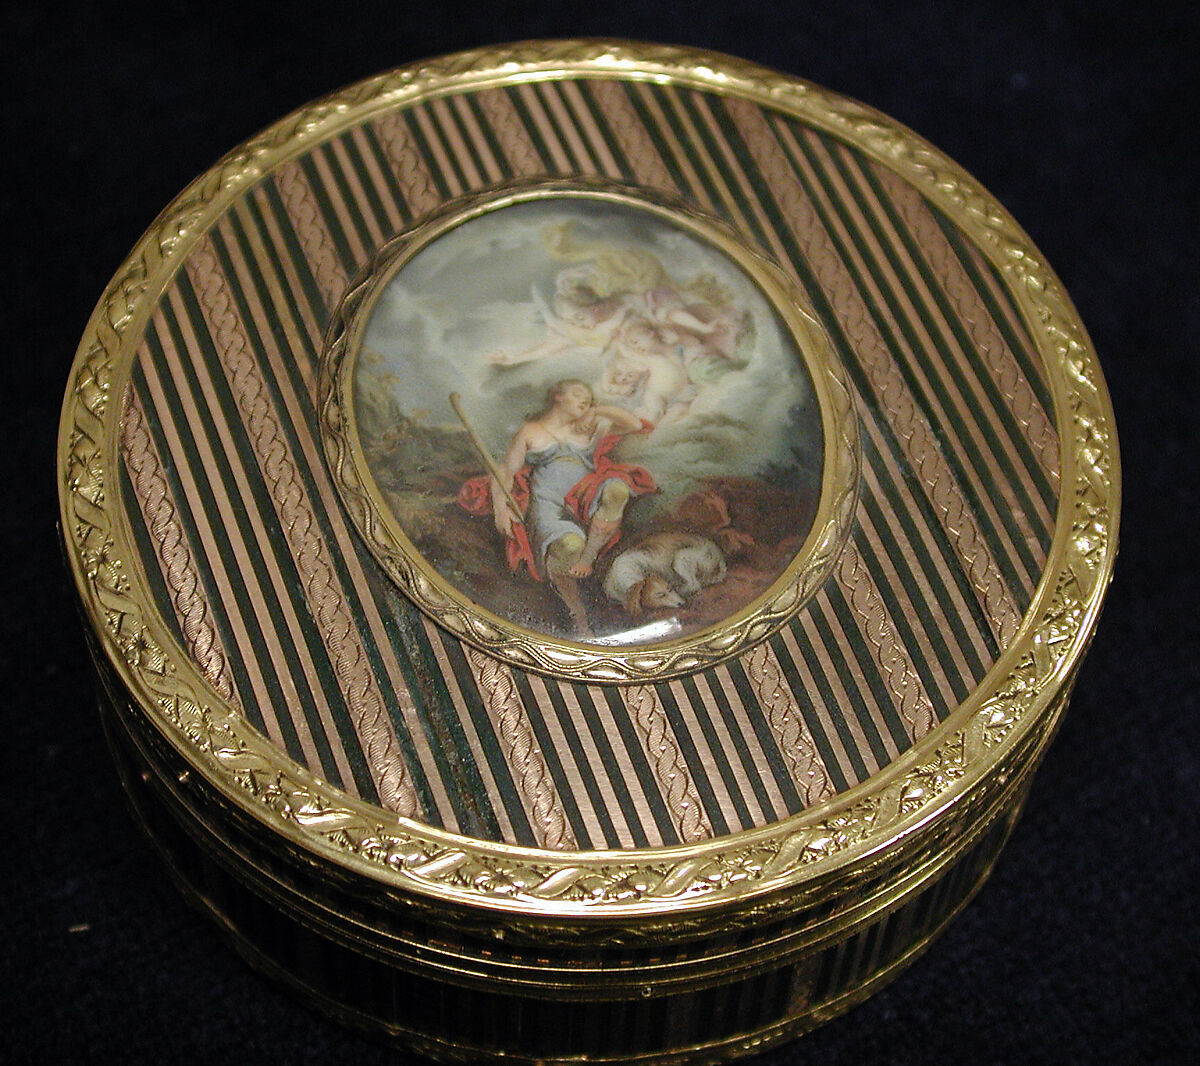 Snuffbox with miniature of sleeping Endymion and Selene, Gold and composition; tortoiseshell; ivory, French, Paris 